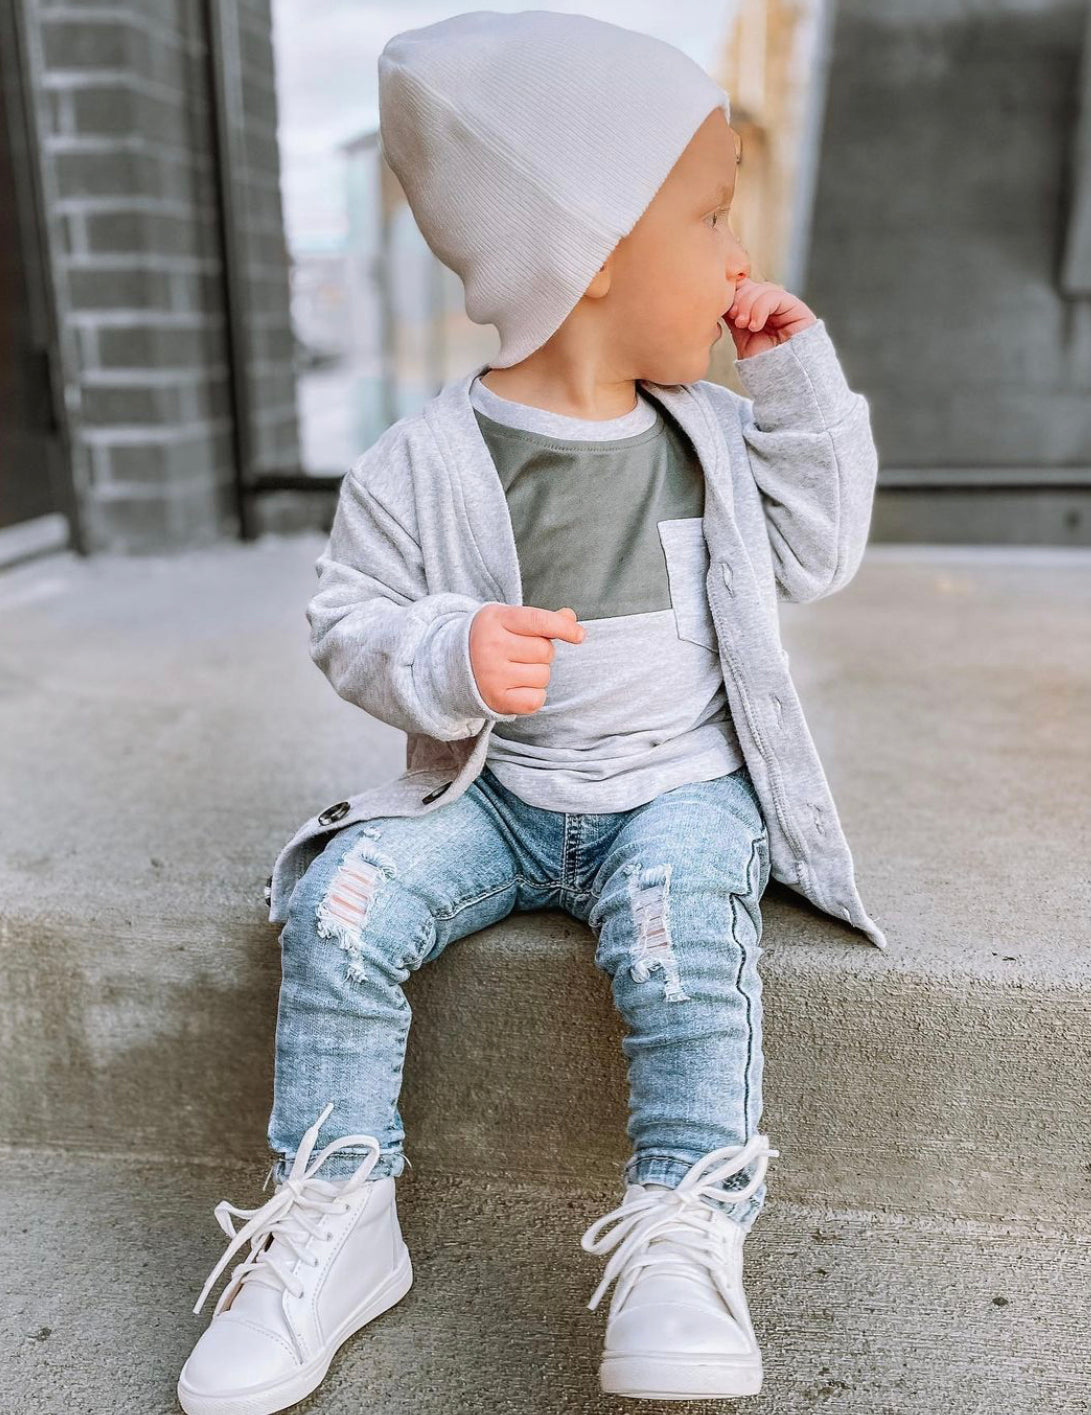 Baby Boy Distressed Jeans Toddler Jeans Unisex Jeans Distressed